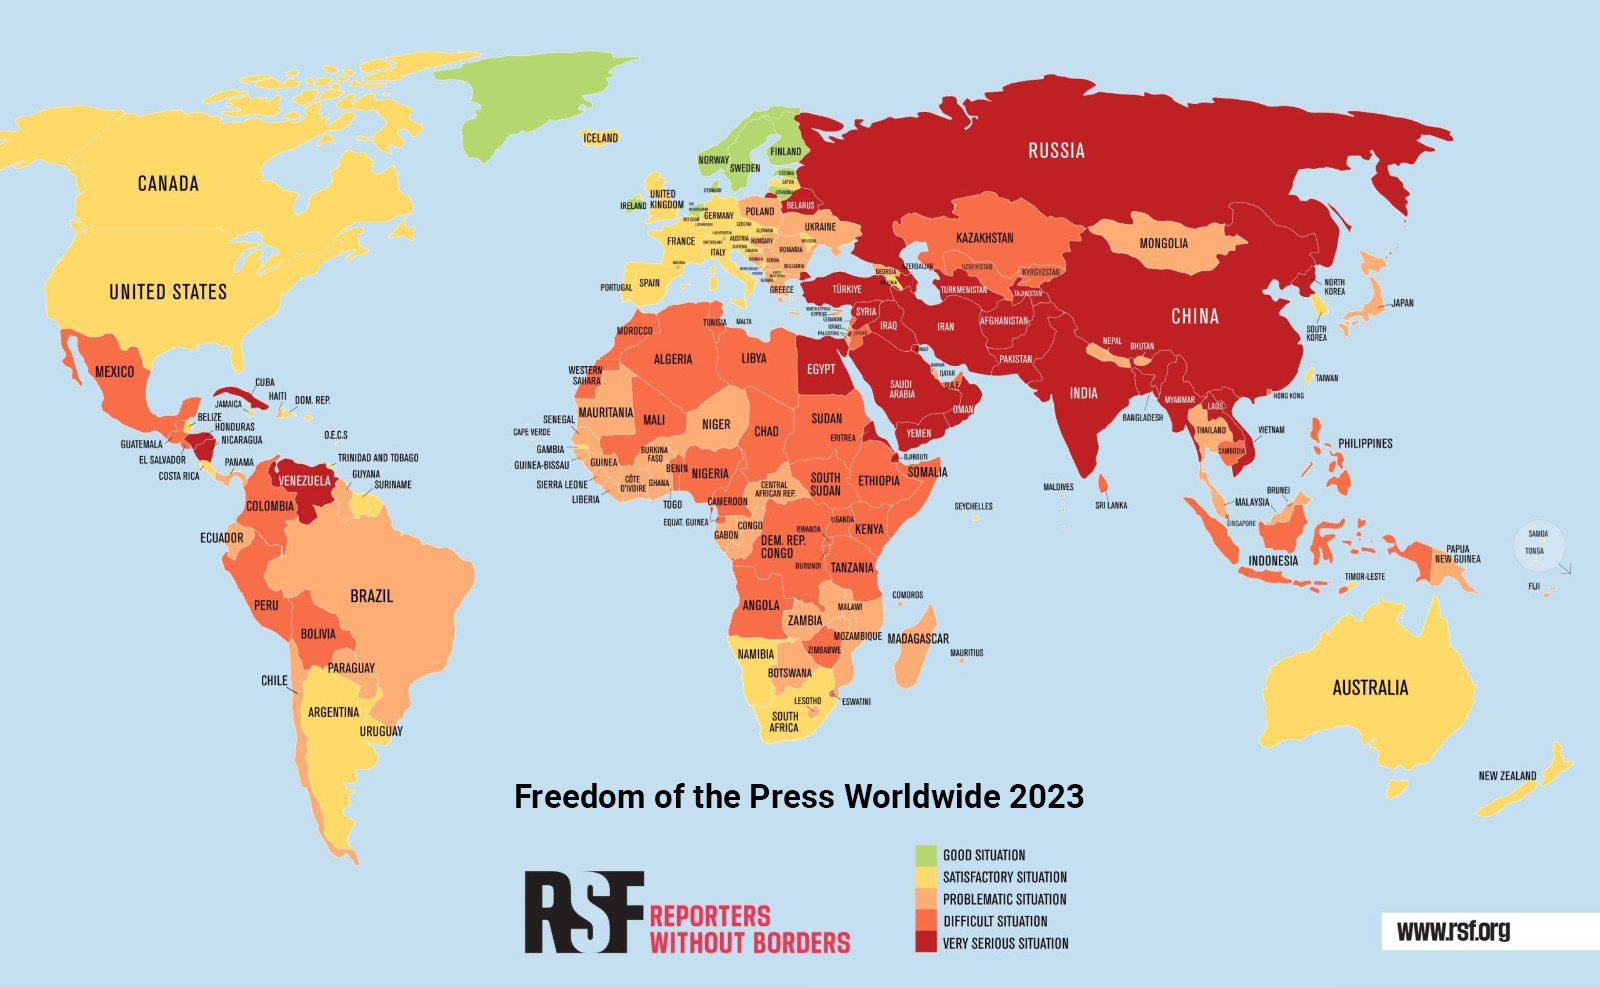 Reporters Without Borders press freedom map highlights the plight of journalists around the globe.